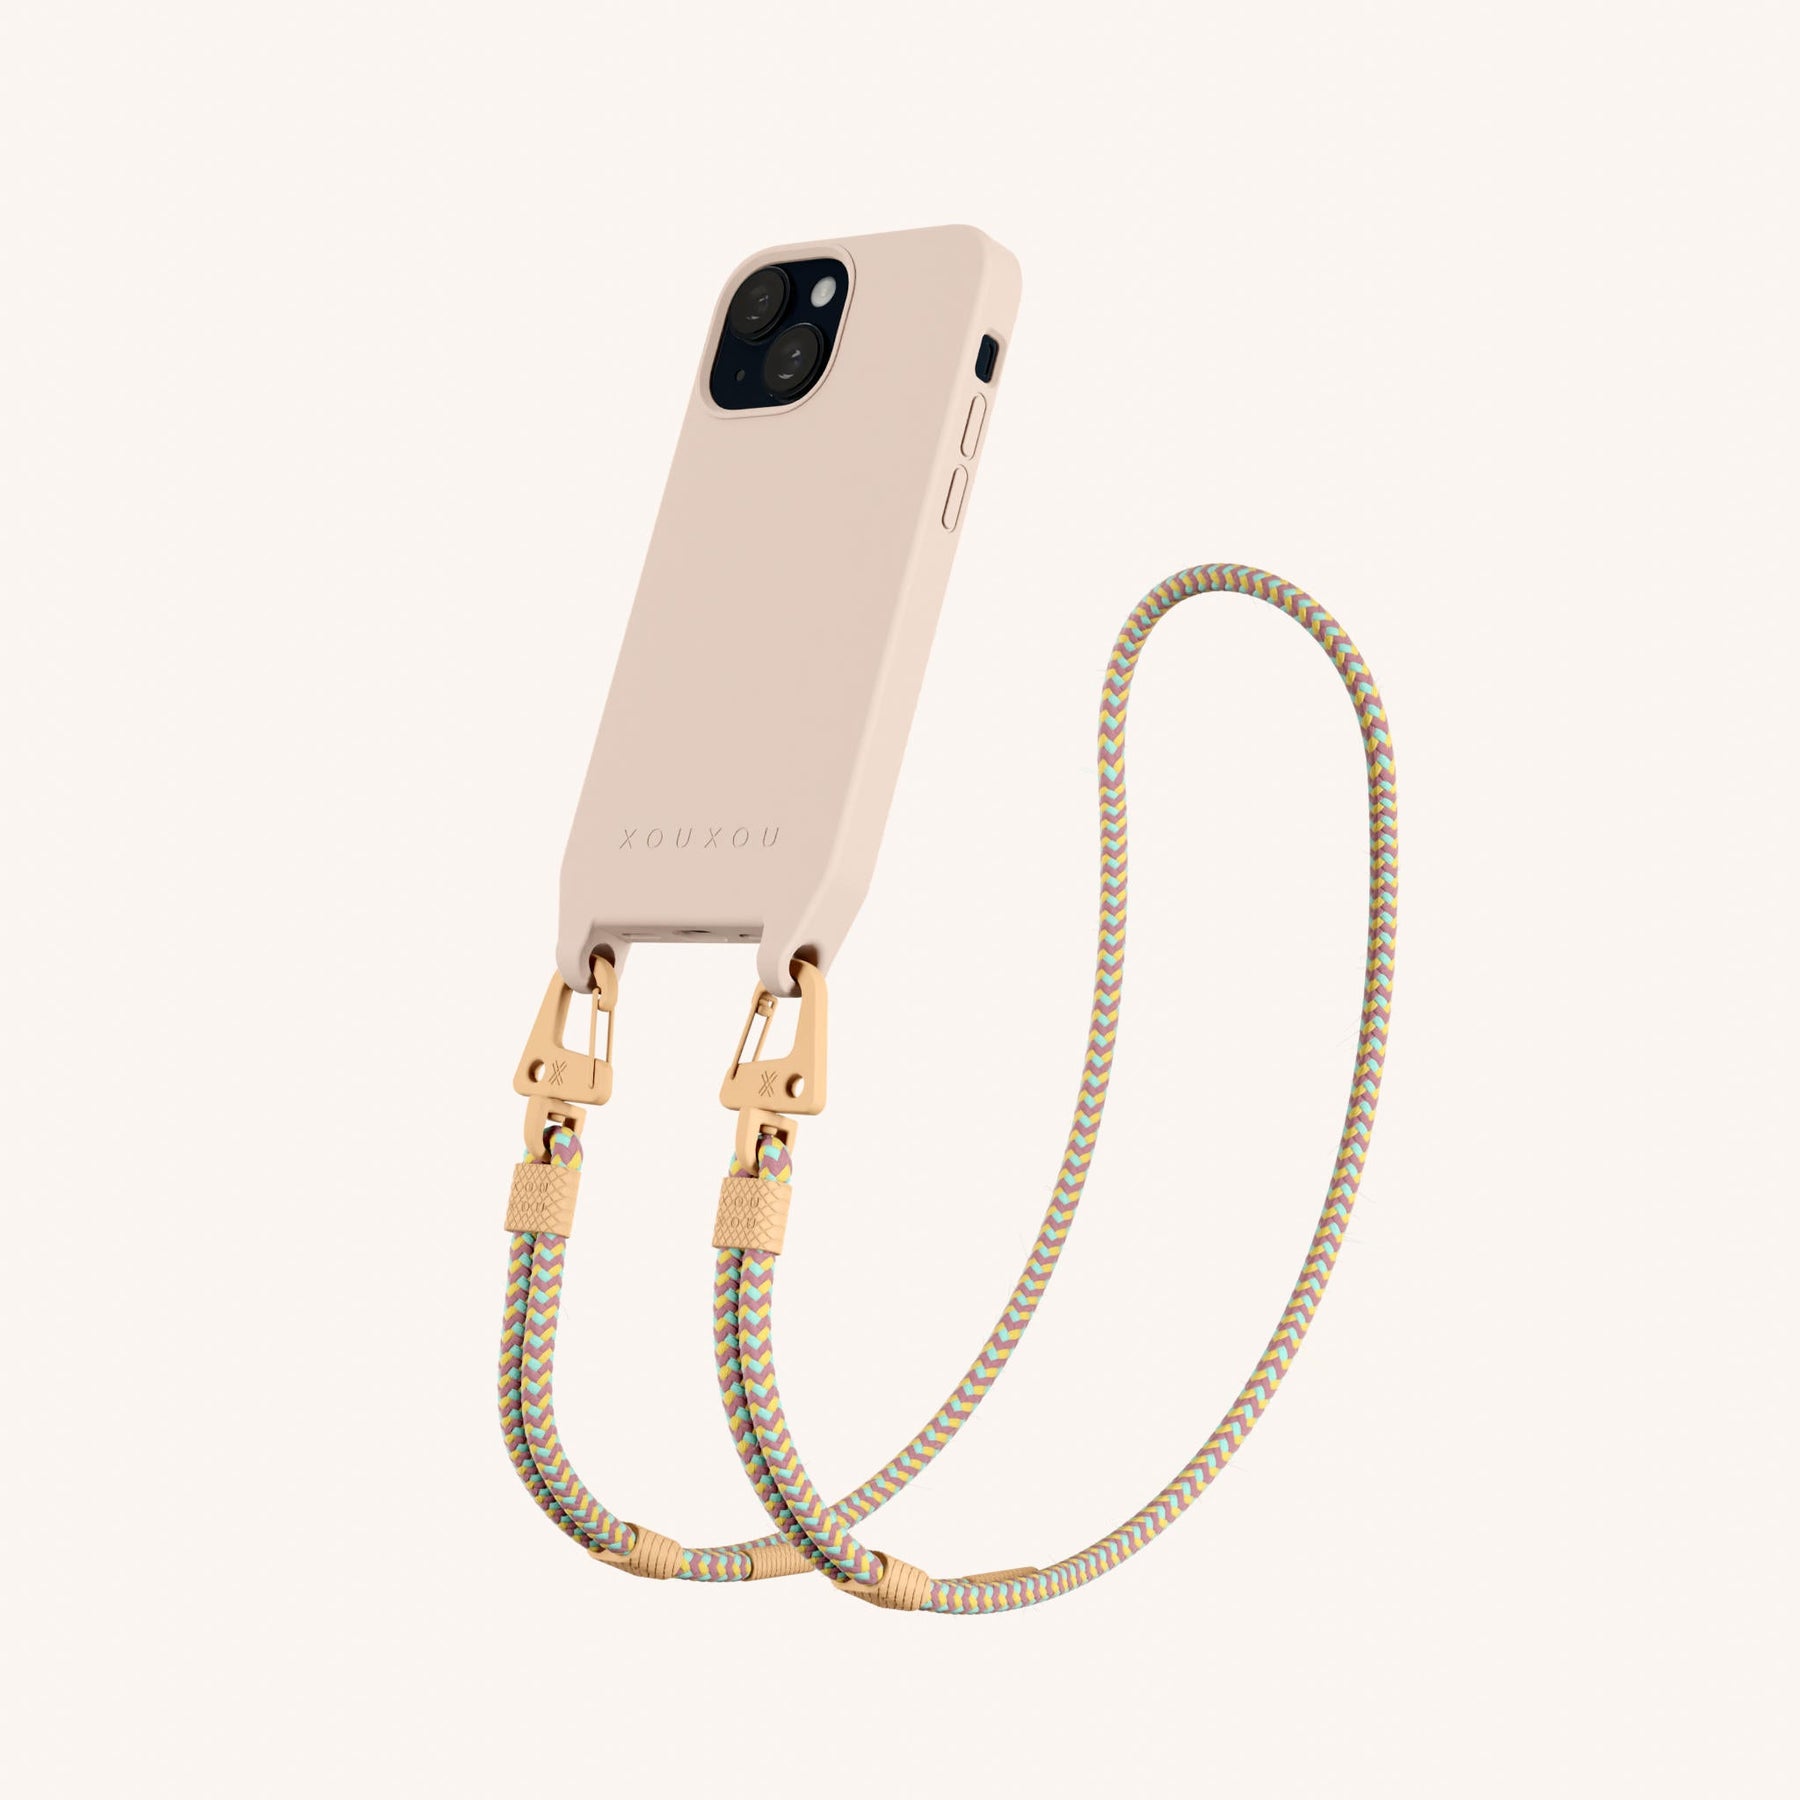 Phone Necklace with Carabiner Rope in Powder Pink + Palm Springs